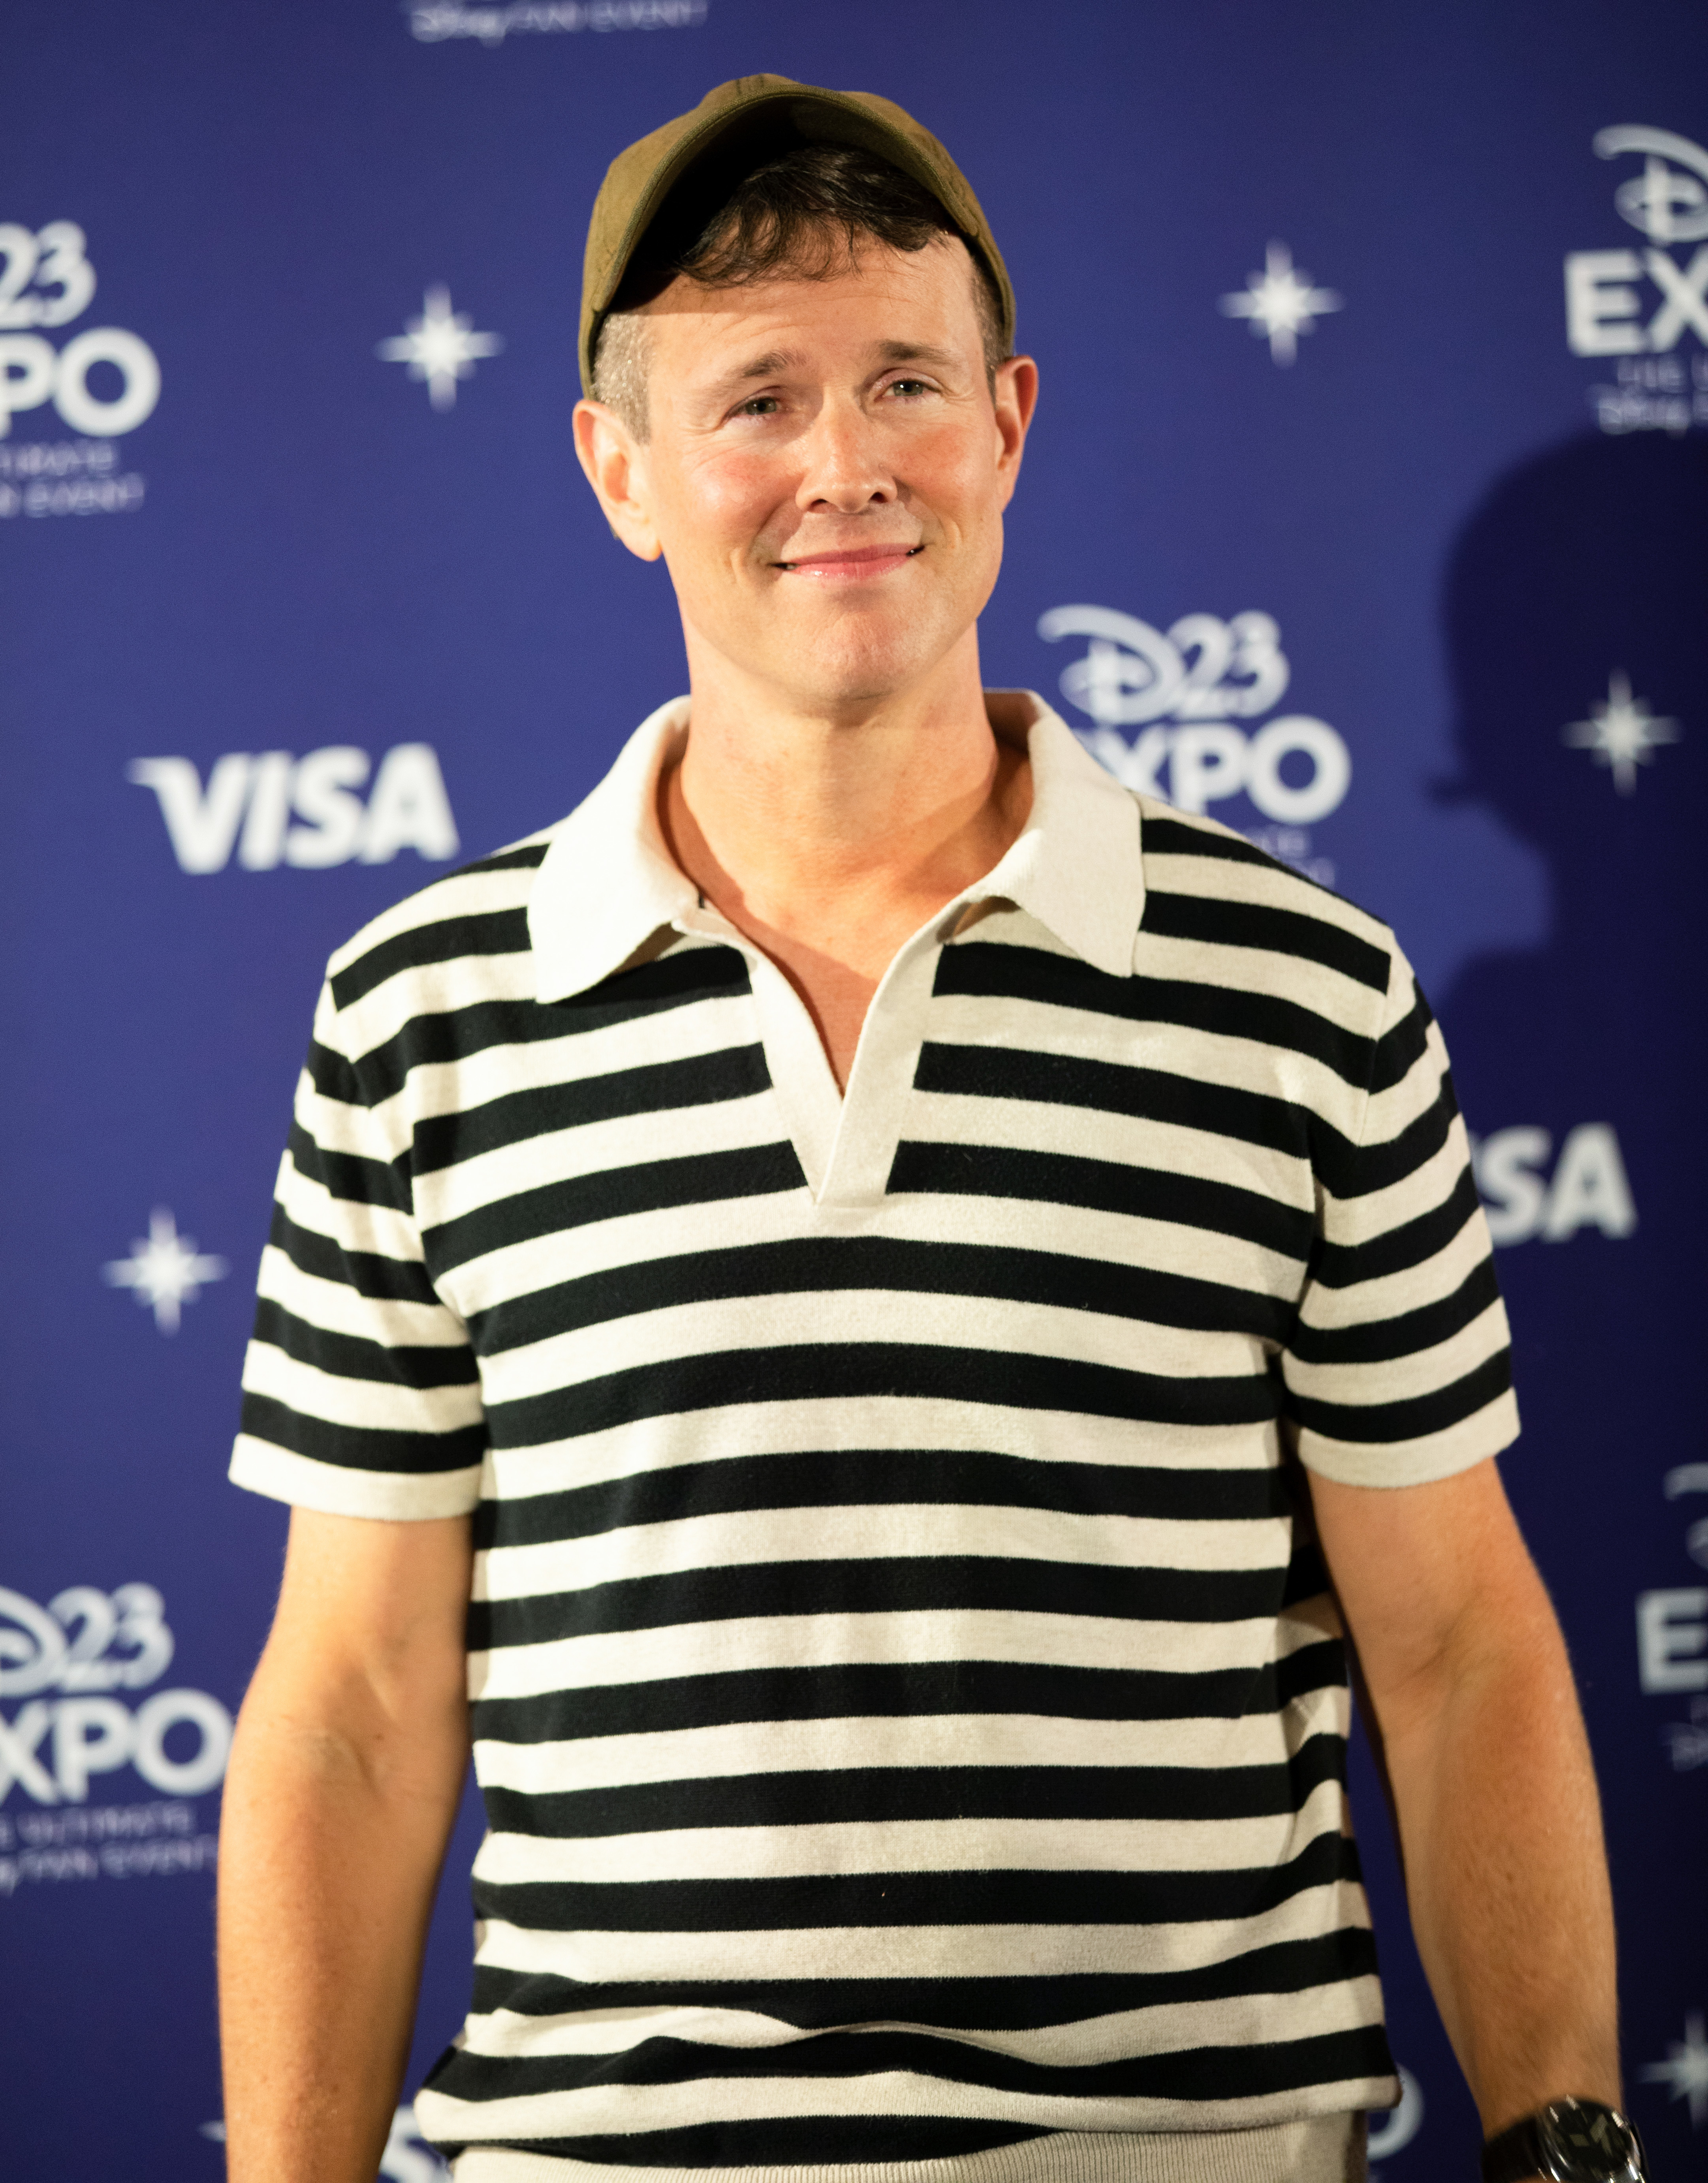 closeup of him in a baseball cap and stripped shirt at an event